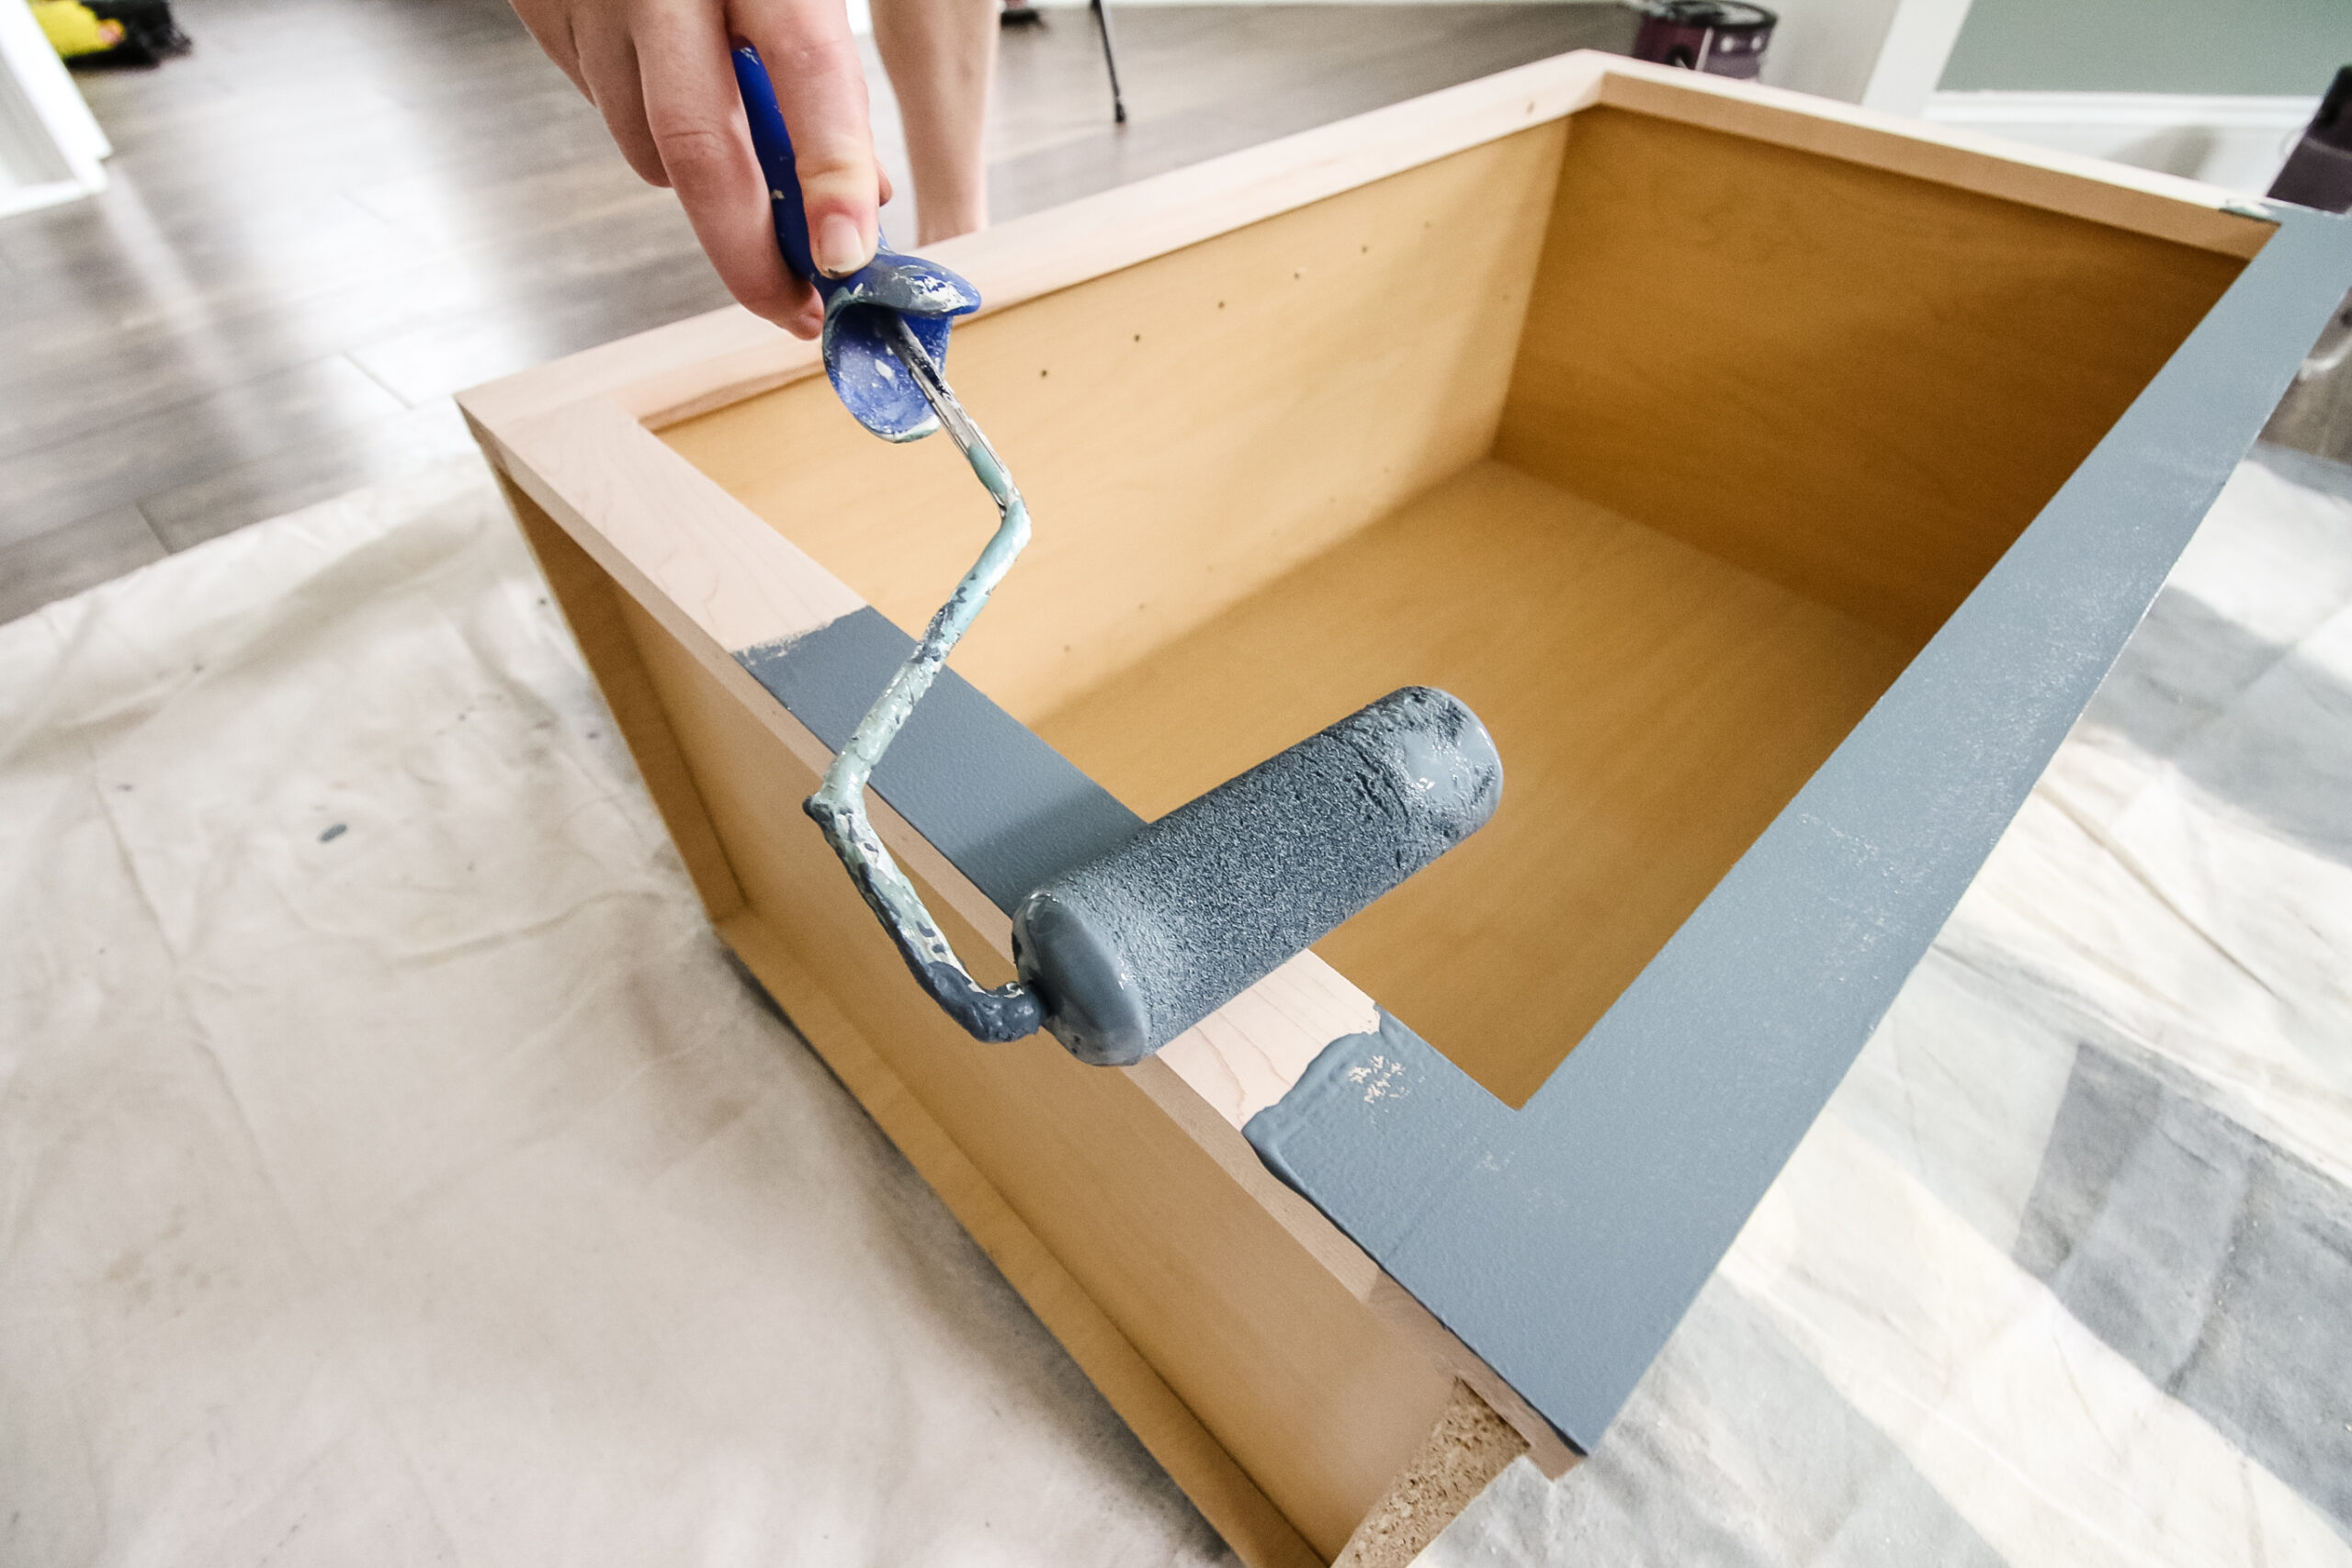 Best Type of Roller for Painting Cabinets (Quick Guide) - Prudent Reviews